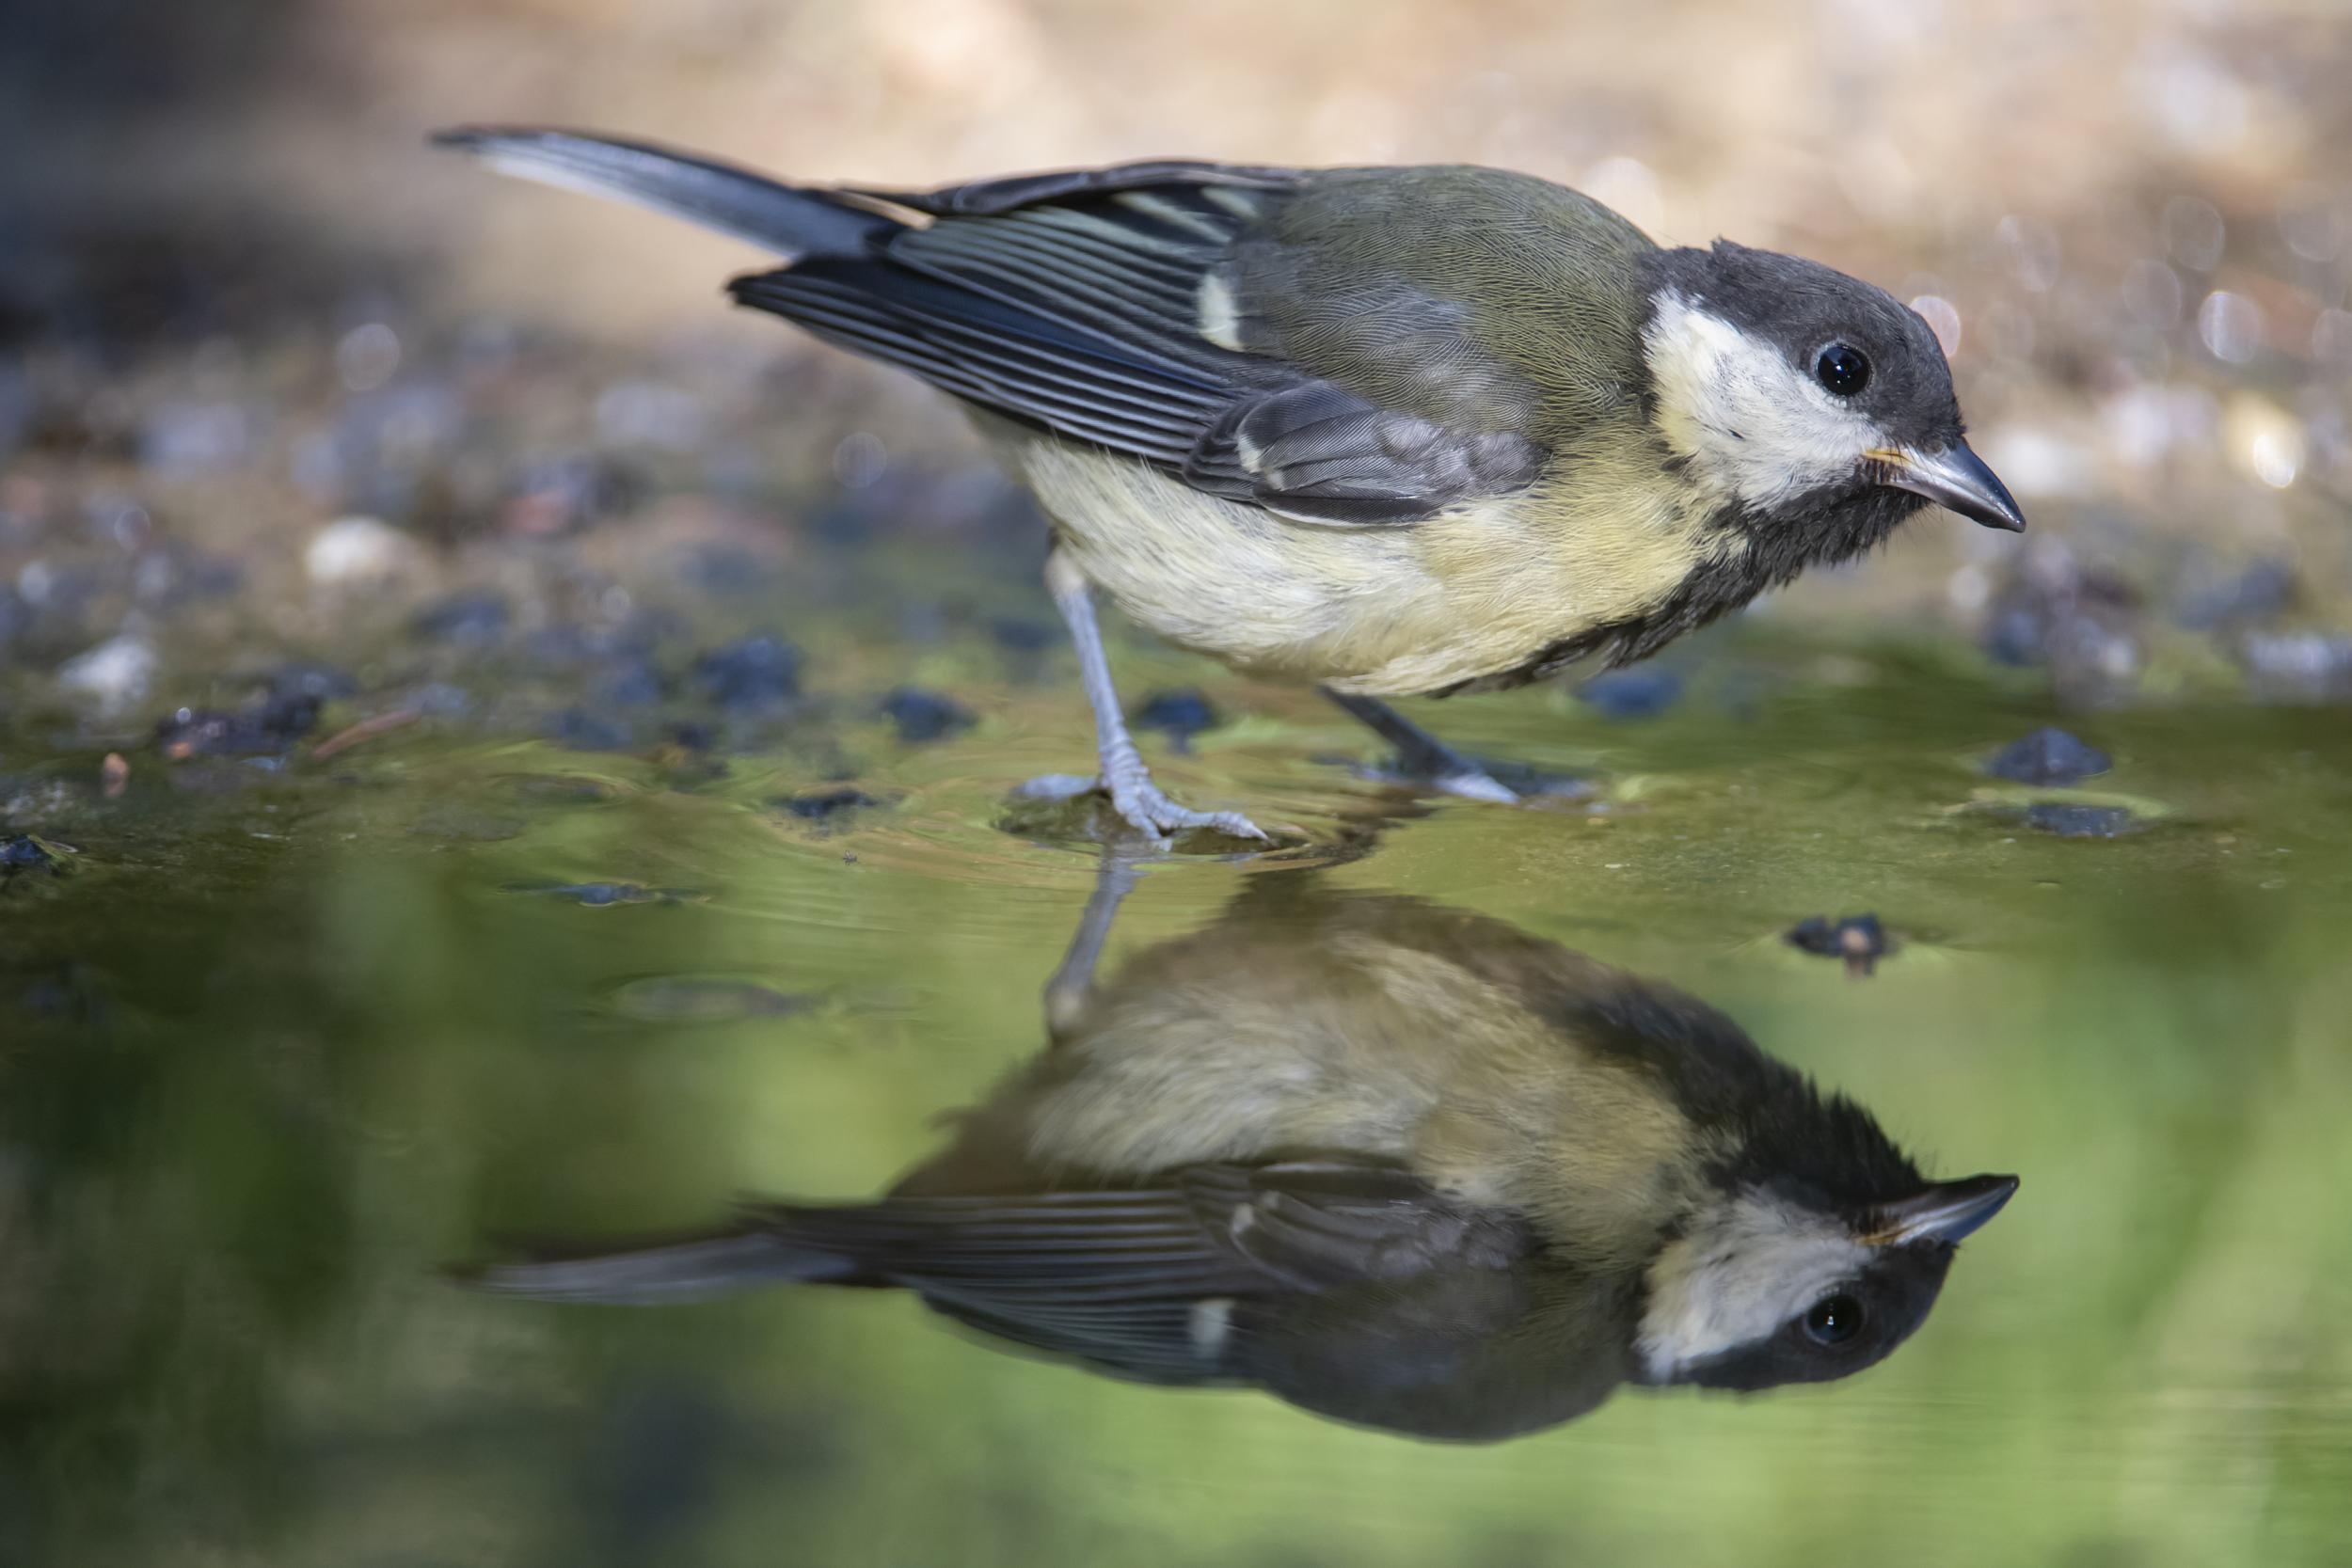 Researchers looked at 13 species in detail and found there was a risk of extinction for all but four of them. Pictured is a great tit